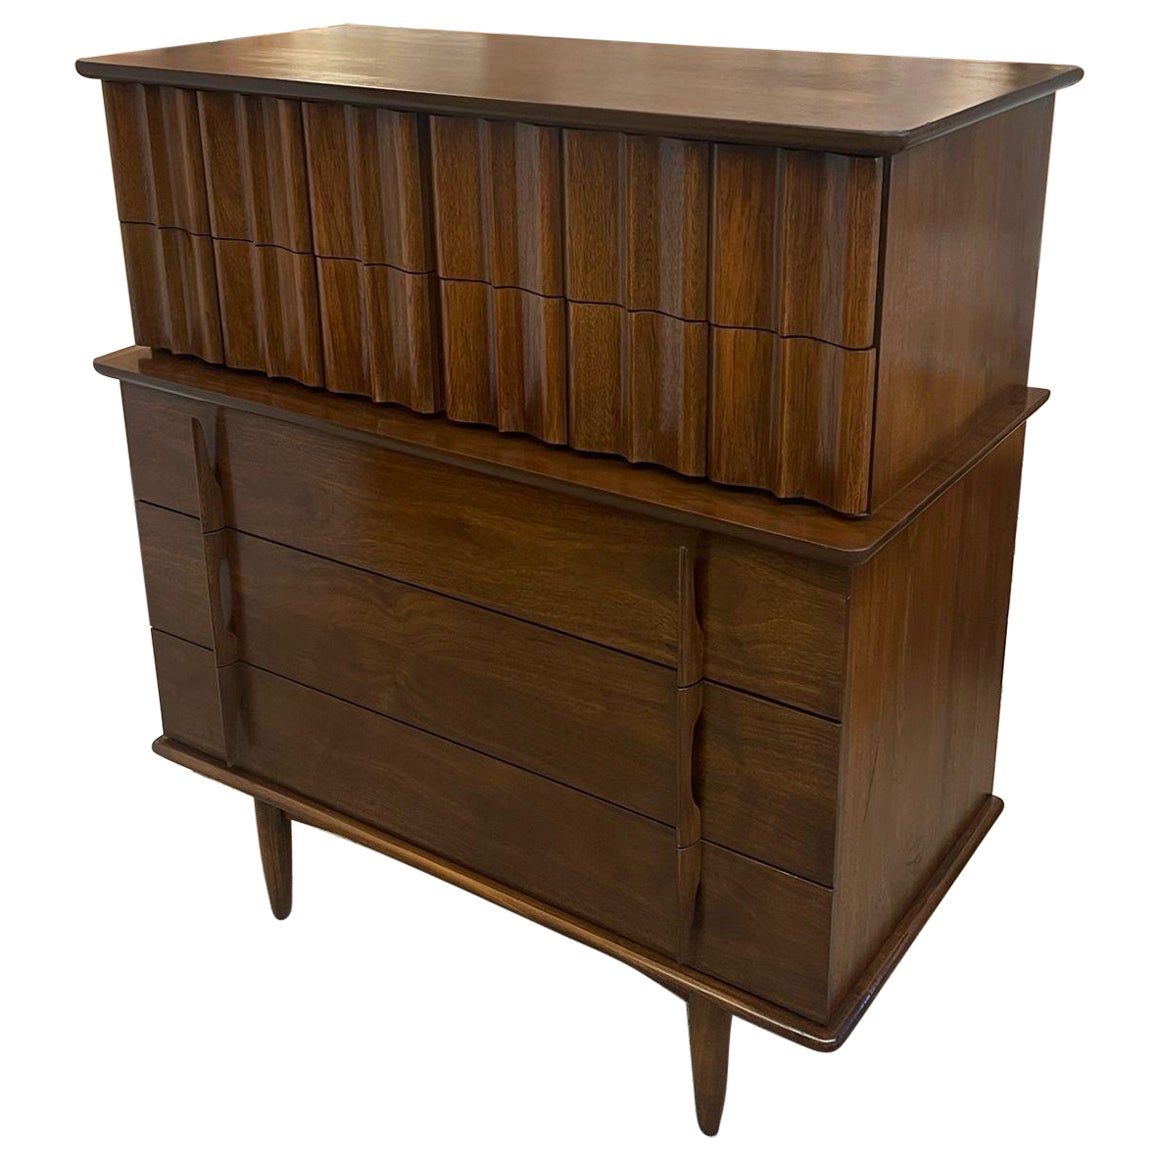 Vintage Mid Century Modern Highboy Dresser by United With Sculpted Wood Front.